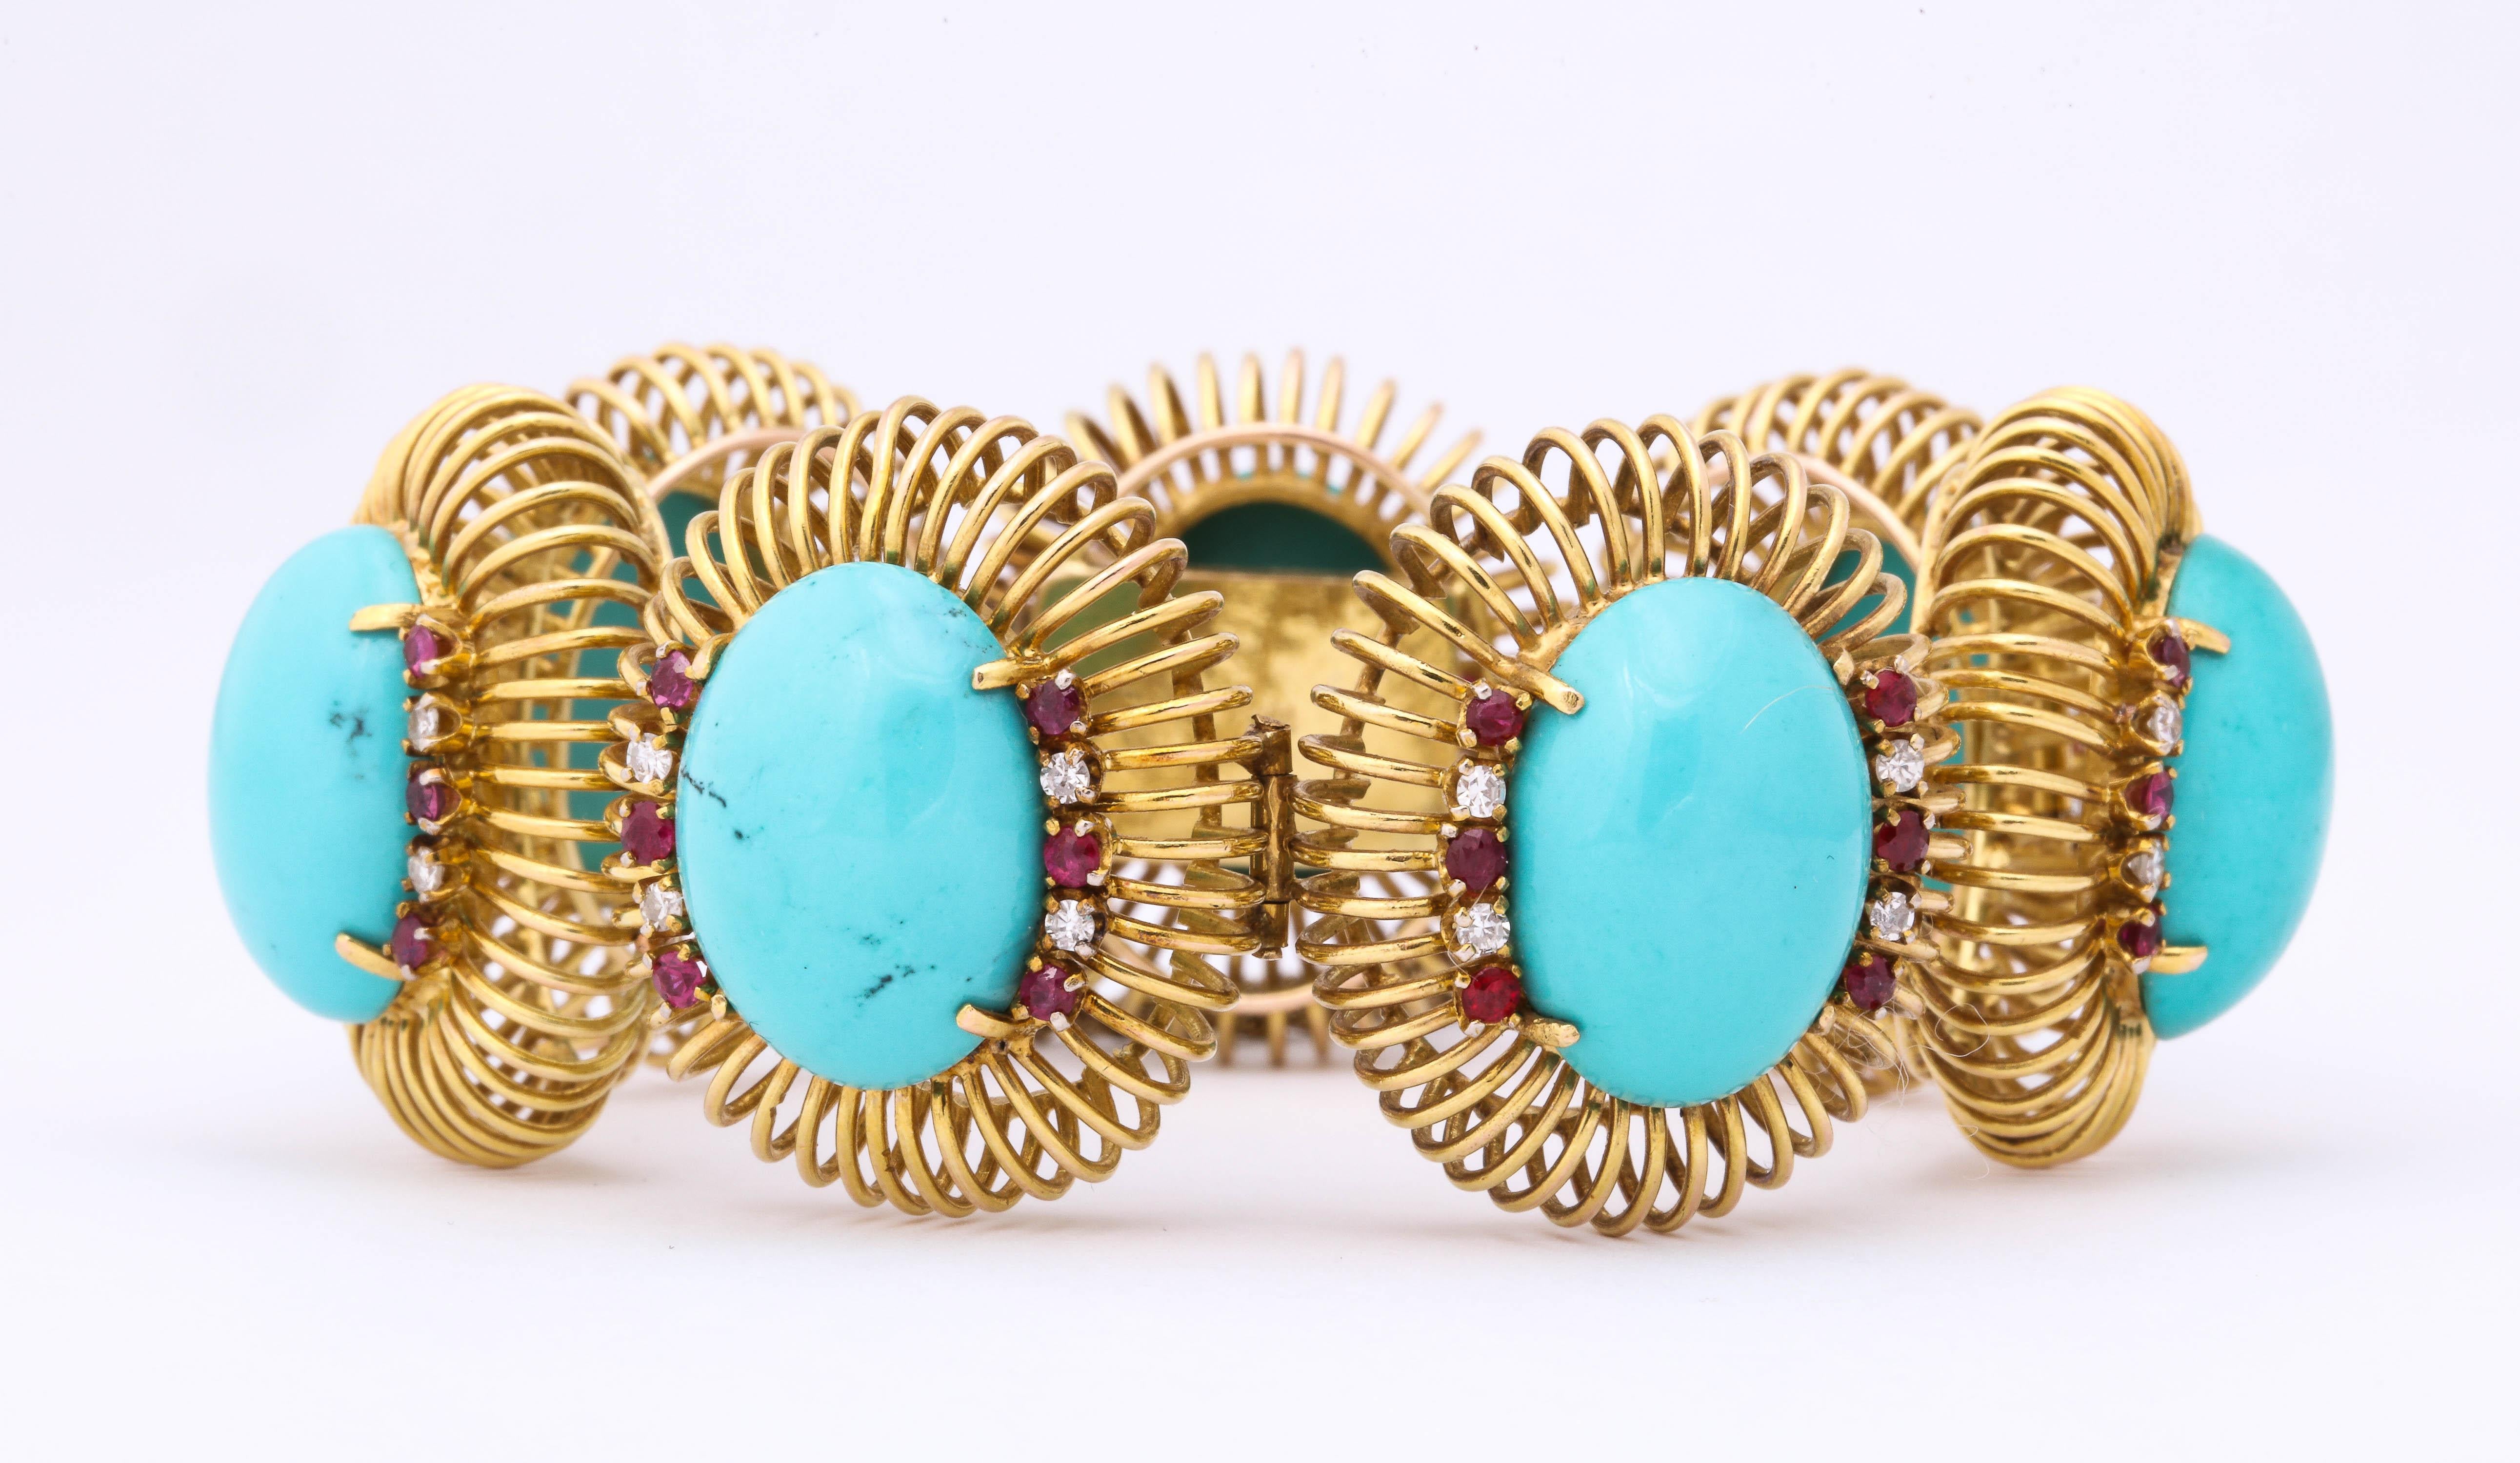 One Ladies 14kt Yellow Gold Open Wirework Link Bracelet composed of Seven 24mm cabochon sleeping Beauty Turquoises and accented with numerous faceted cut rubies and round diamonds.created in 1960’s in America  